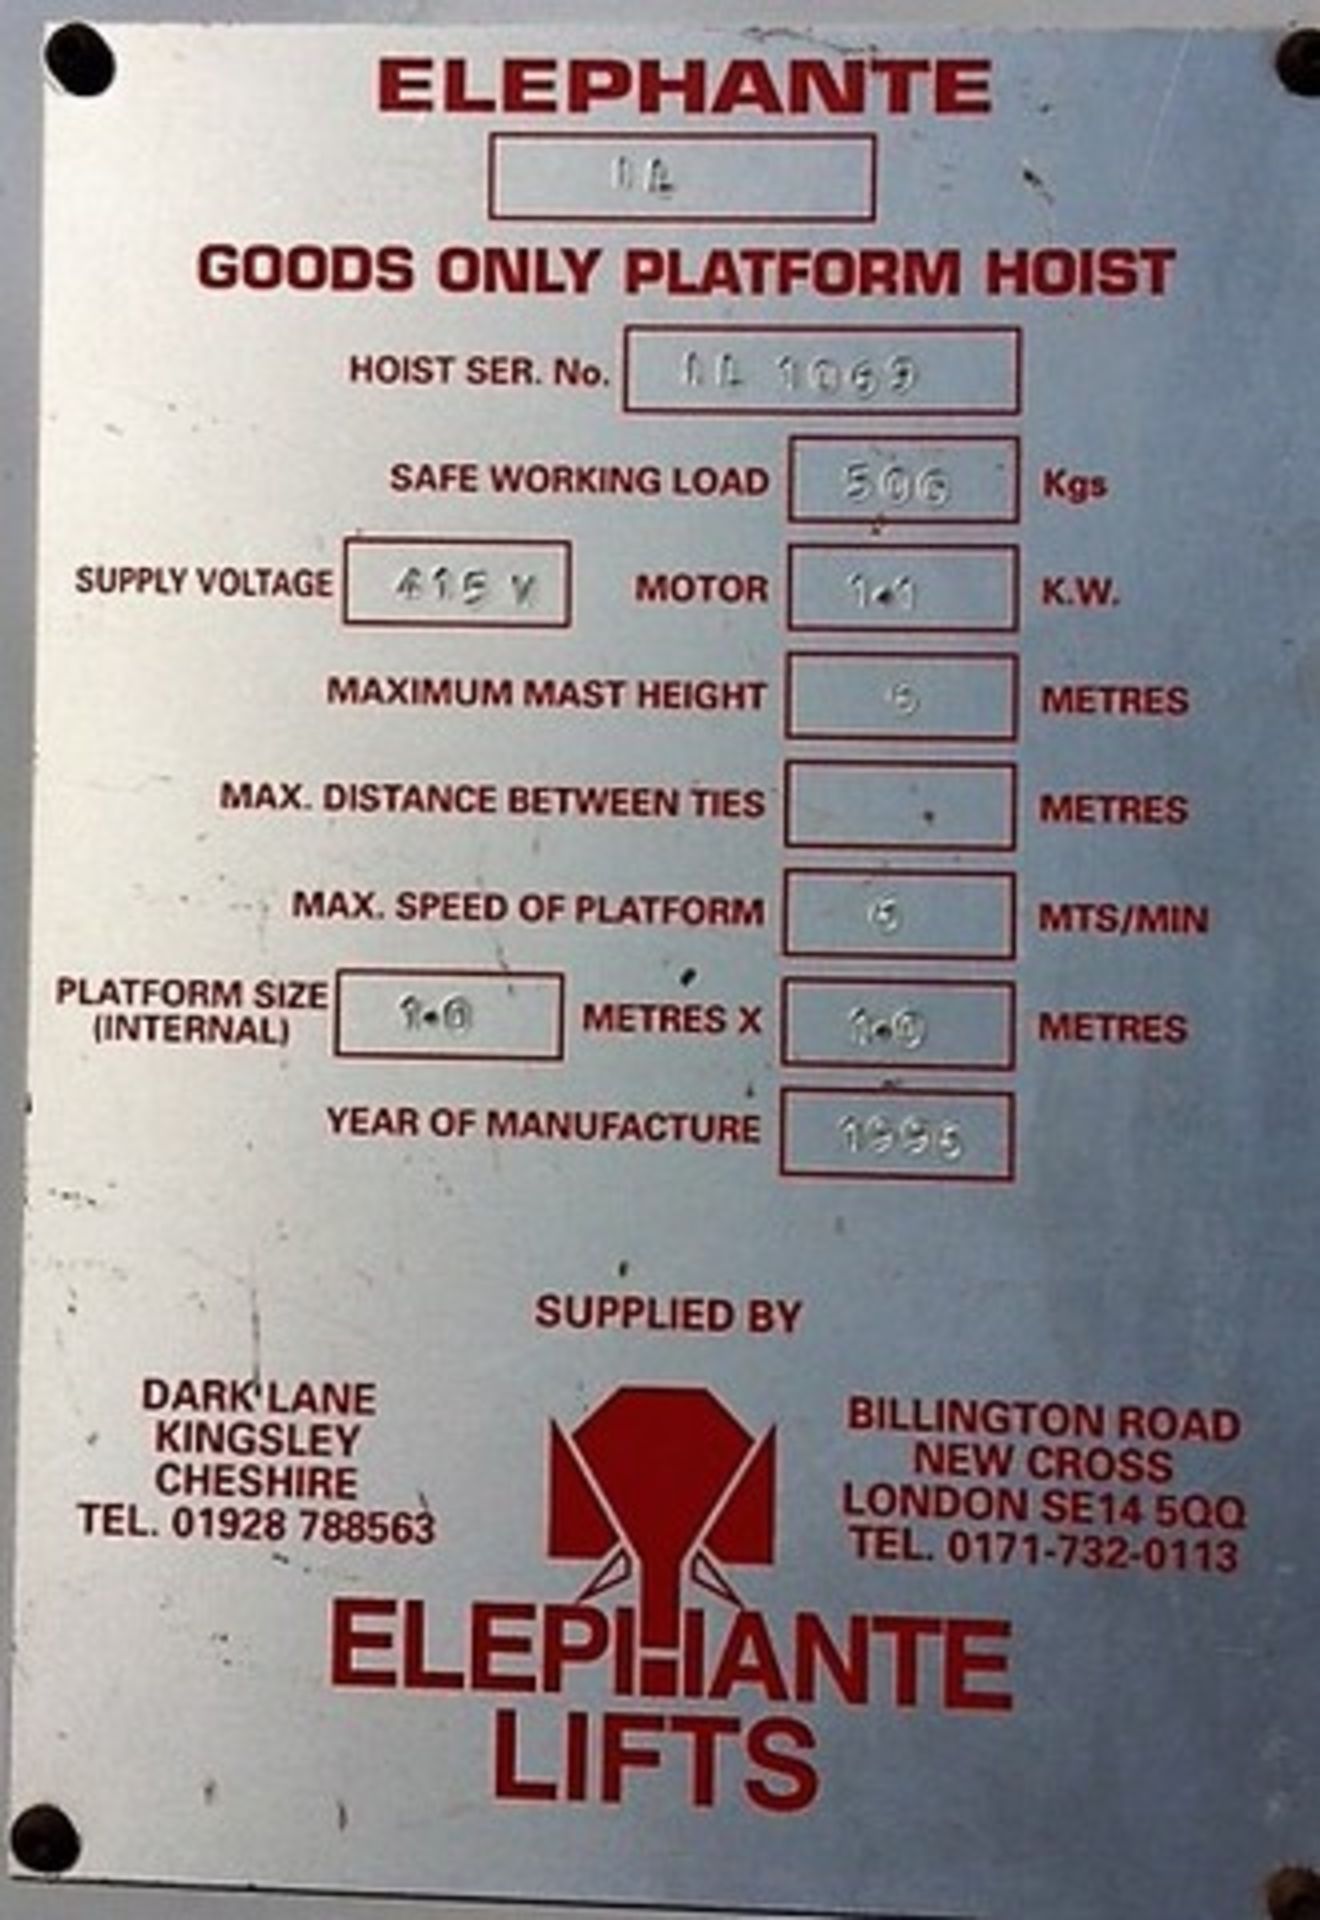 1996 ELEPHANTE goods only lift. Safe working load 500kg. S/N 1L1069. Supply voltage 415. Max mast he - Image 4 of 5